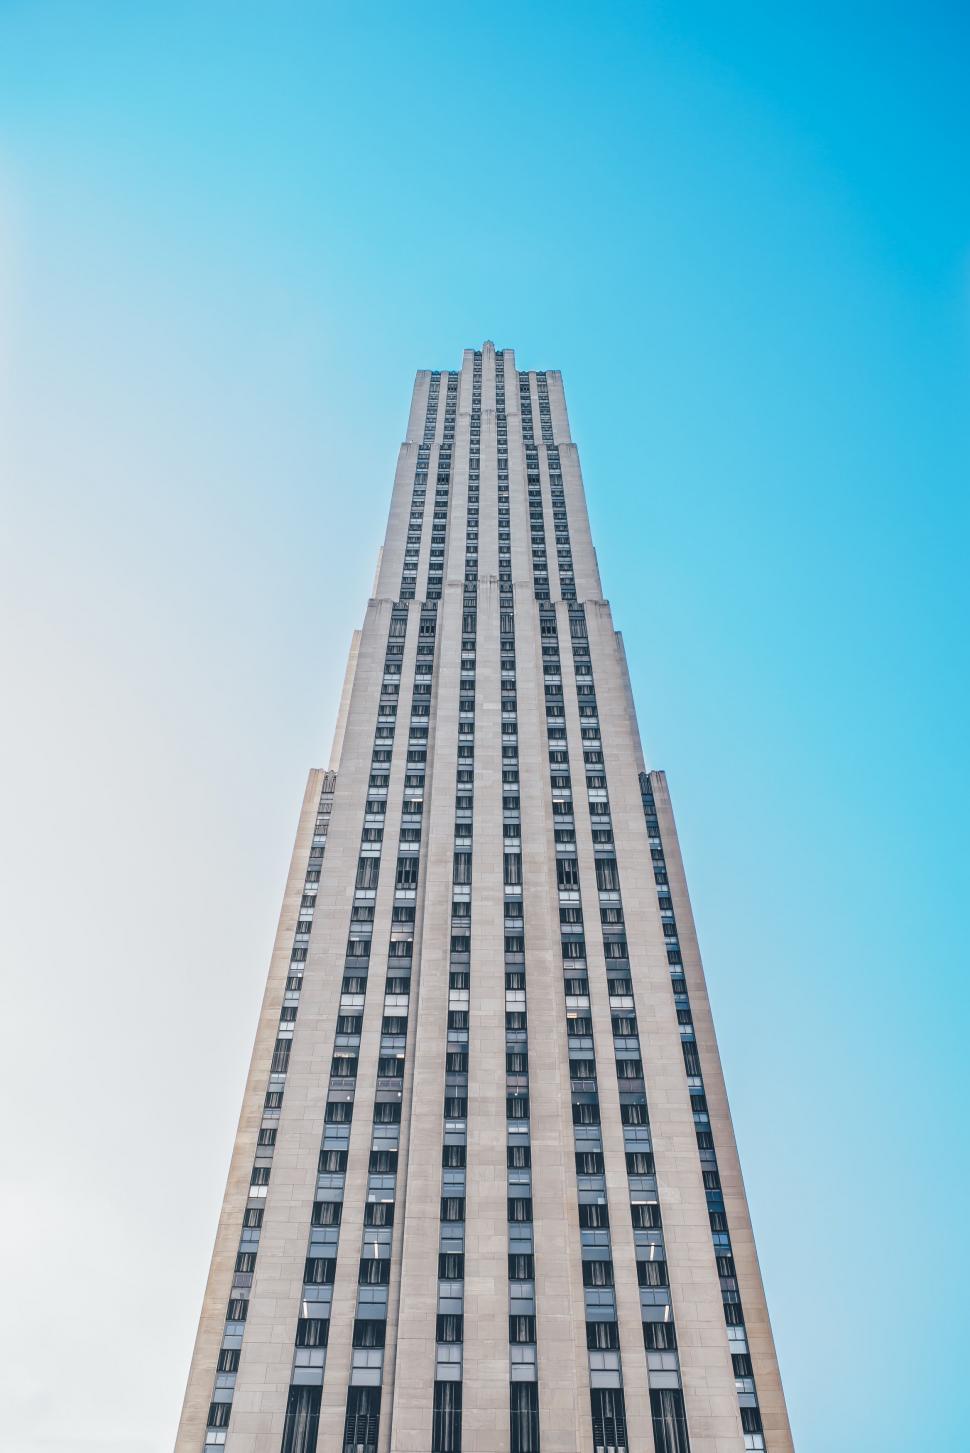 Free Image of Tall skyscraper against a blue sky 